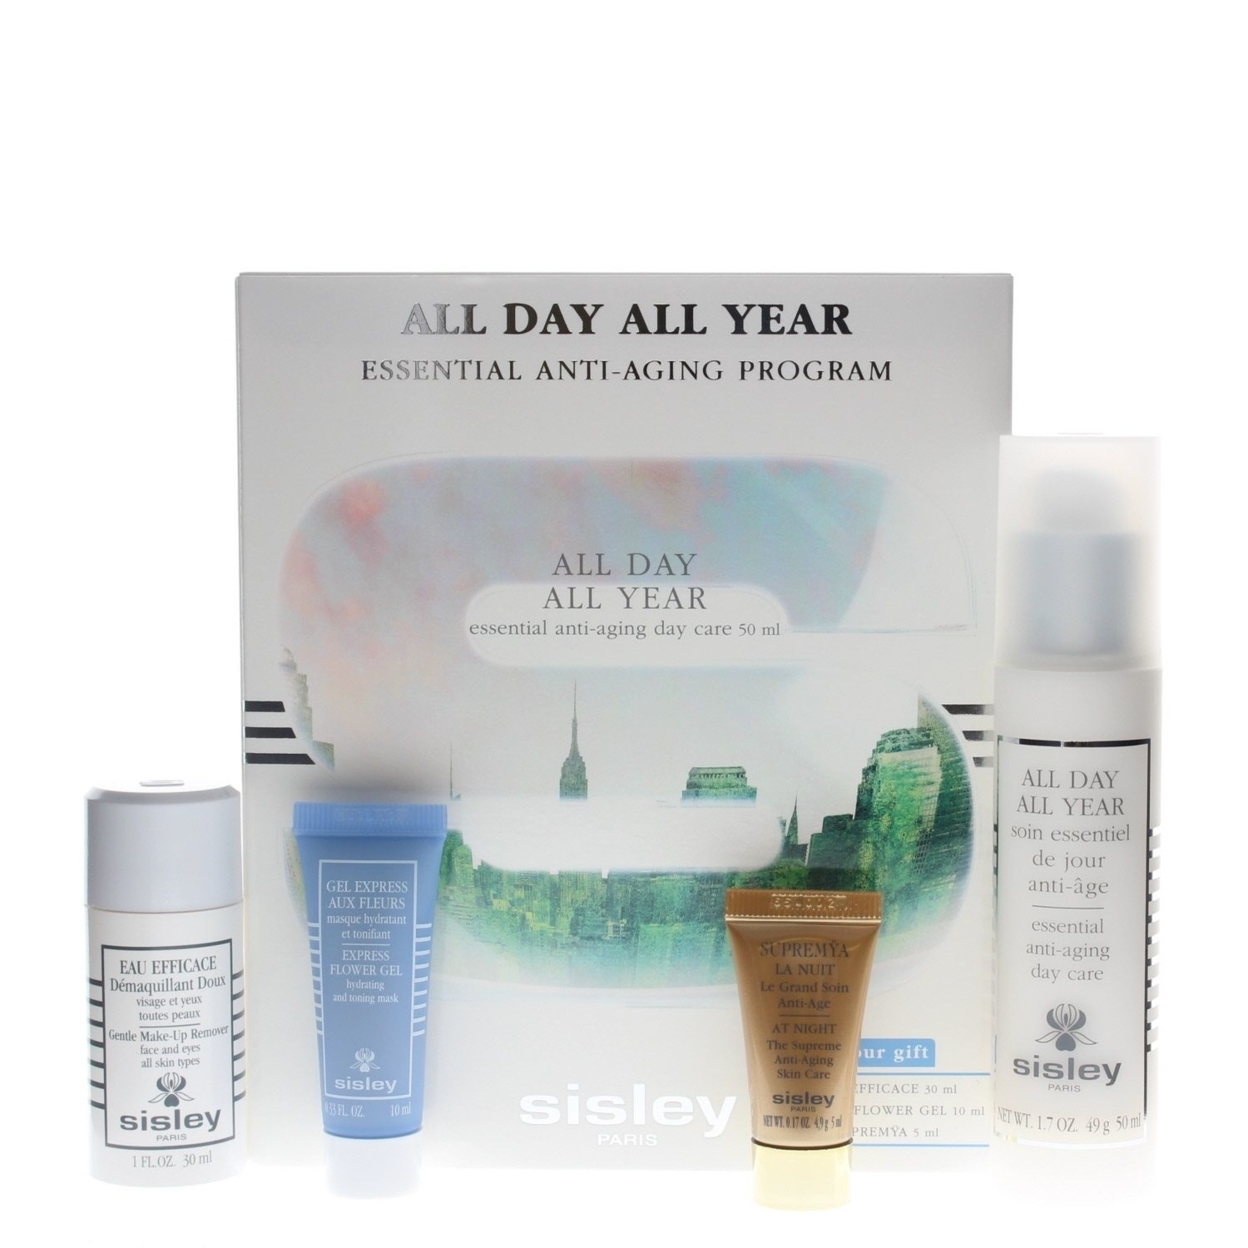 Sisley All Day All Year Essential Anti-Aging Program 4pc Kit With Day Cream, Make-Up Remover, Gel, Night Cream